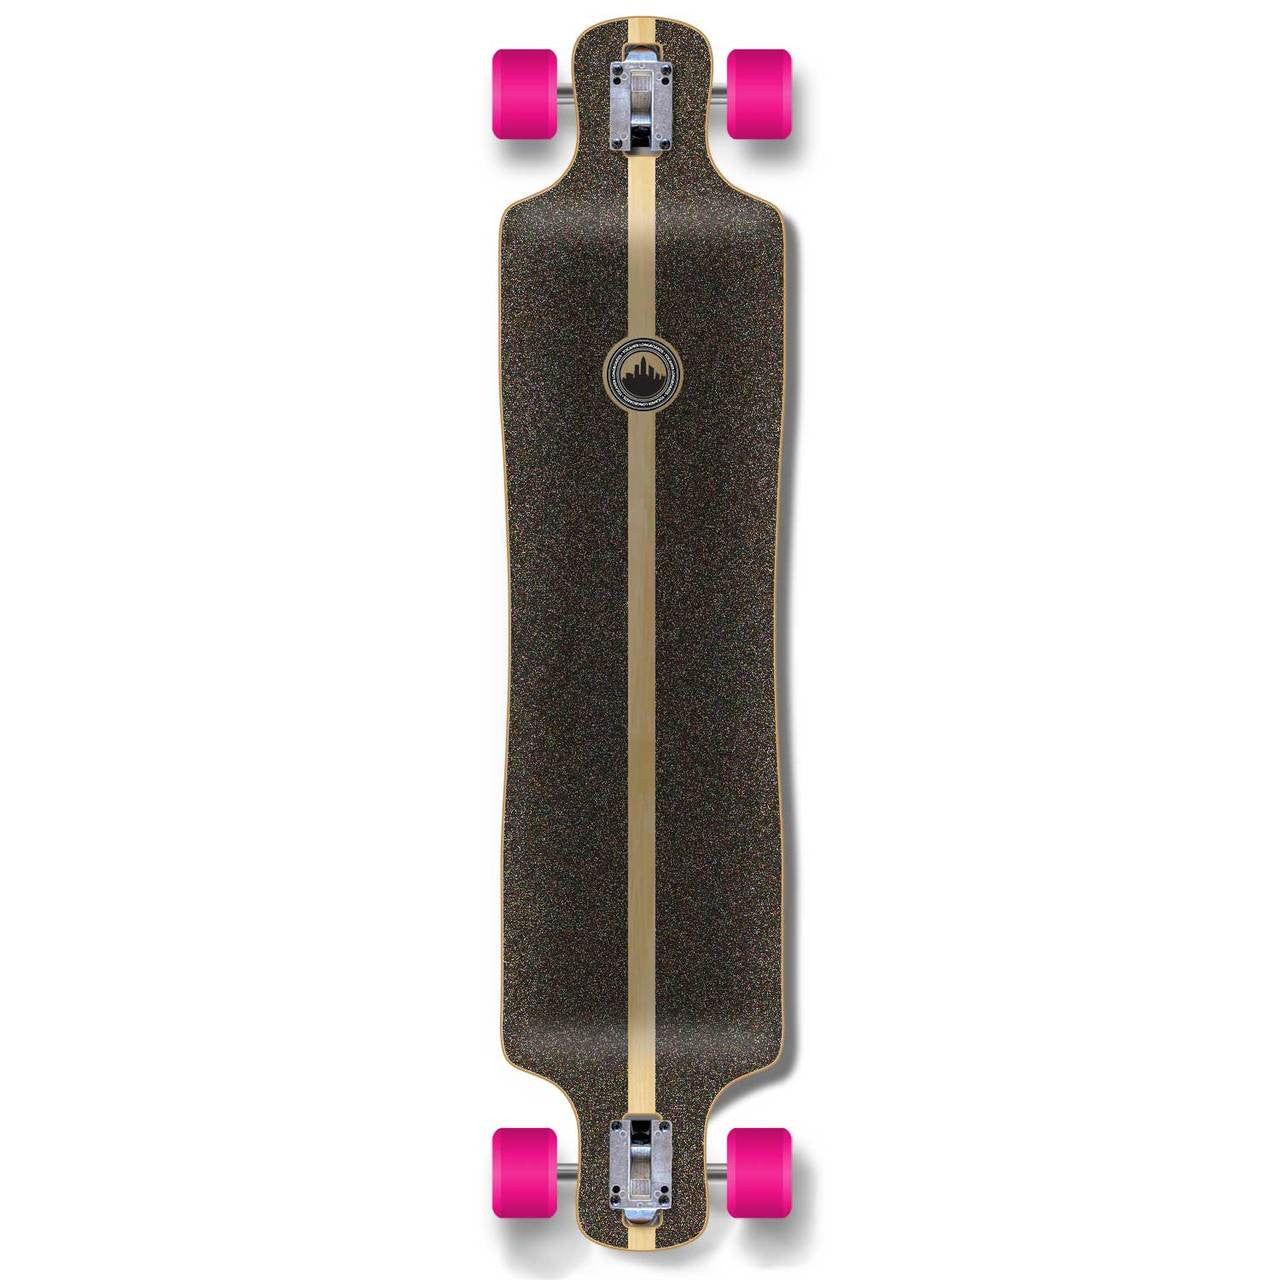 Yocaher Lowrider Longboard Complete - Gradient Green